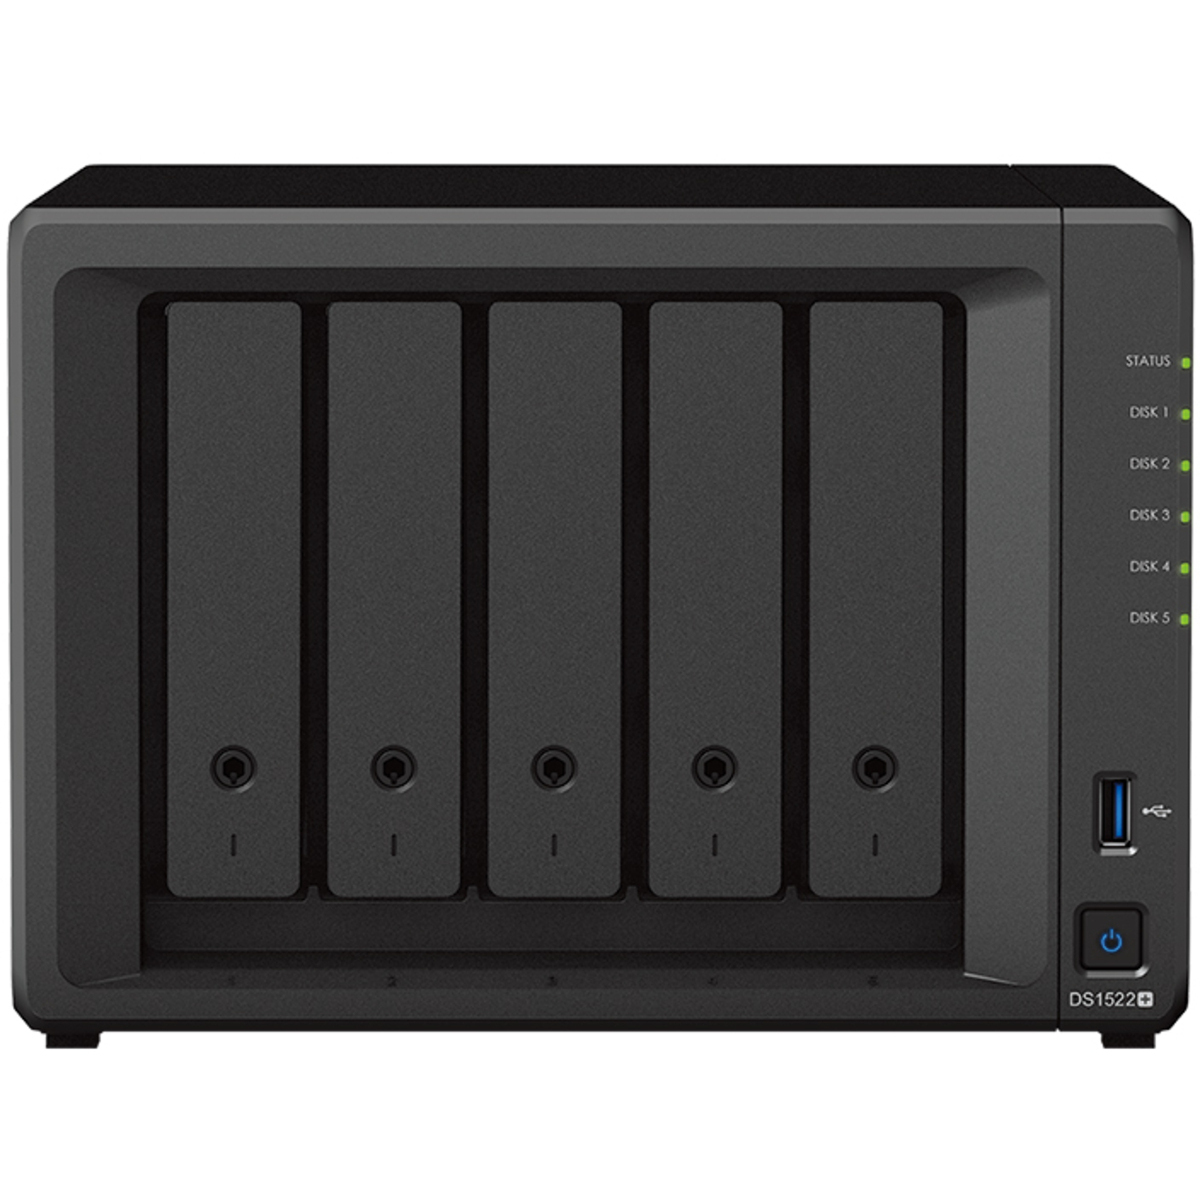 Synology DiskStation DS1522+ 30tb 5-Bay Desktop Multimedia / Power User / Business NAS - Network Attached Storage Device 5x6tb Western Digital Red Plus WD60EFPX 3.5 5640rpm SATA 6Gb/s HDD NAS Class Drives Installed - Burn-In Tested - ON SALE DiskStation DS1522+